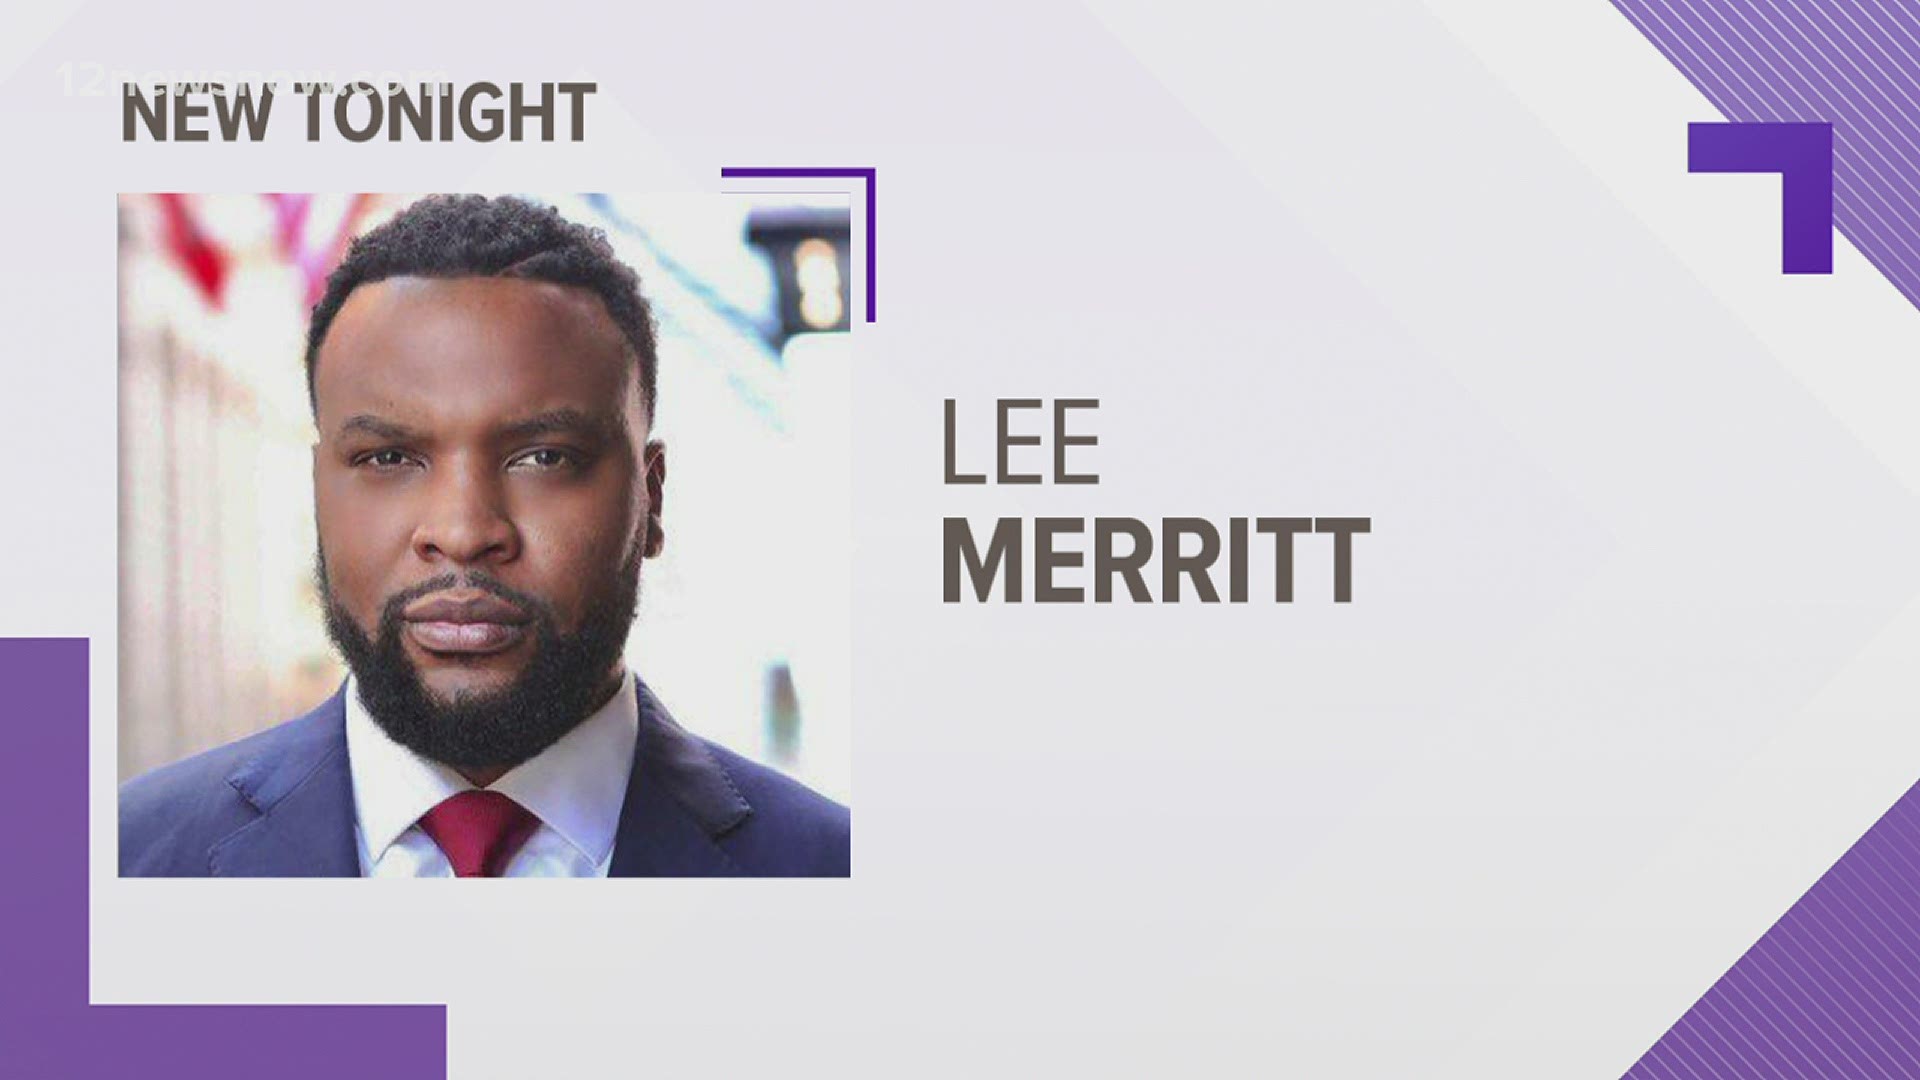 Merritt is recognized nationally for his representation of families of victims killed by police. Merritt will run on the Democratic ticket.